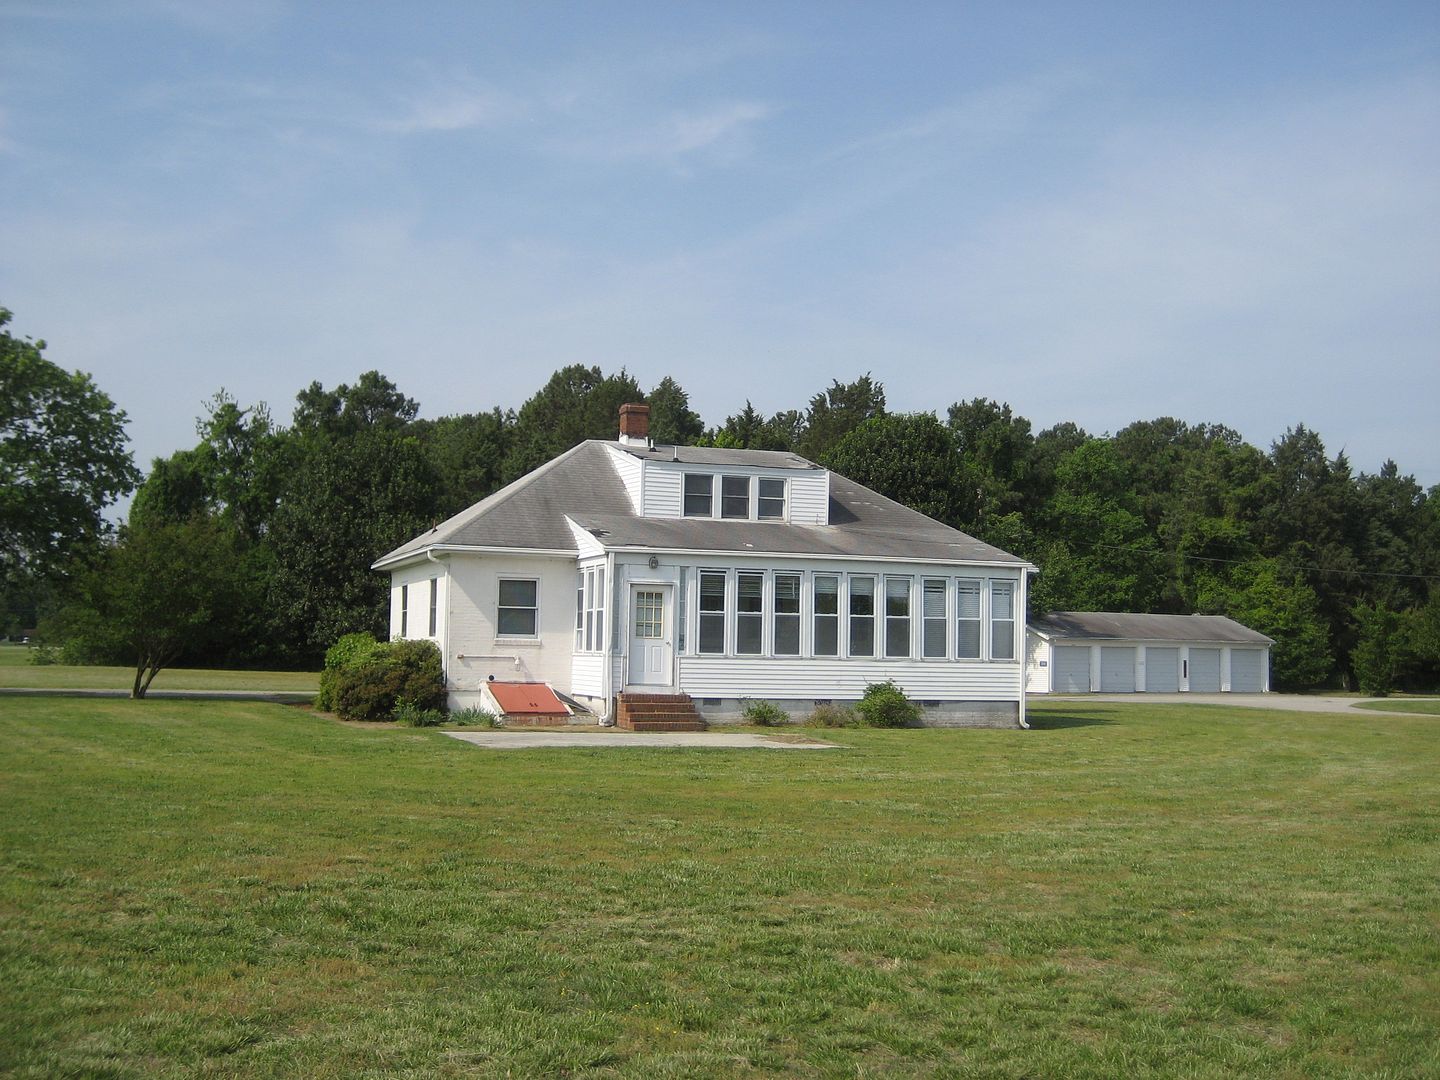 This is the last known surviving Dupont Design at Penniman (now Cheatham Annex). This was known as The Hopewell design, and there are several of these homes at the DuPont plant in Hopewell, Virginia. 